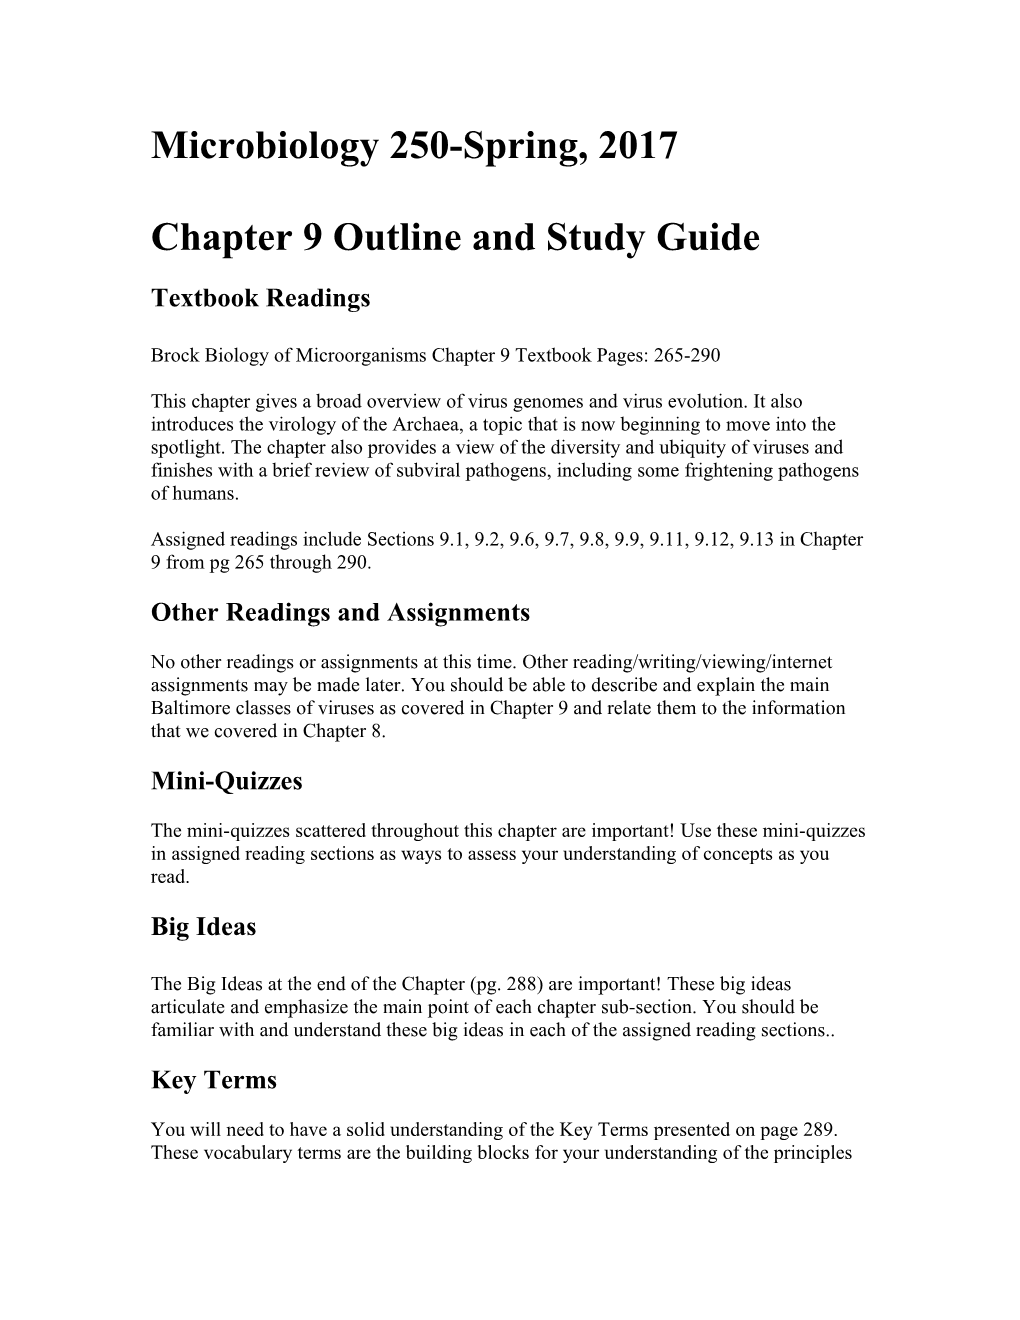 Chapter 9 Outline and Study Guide